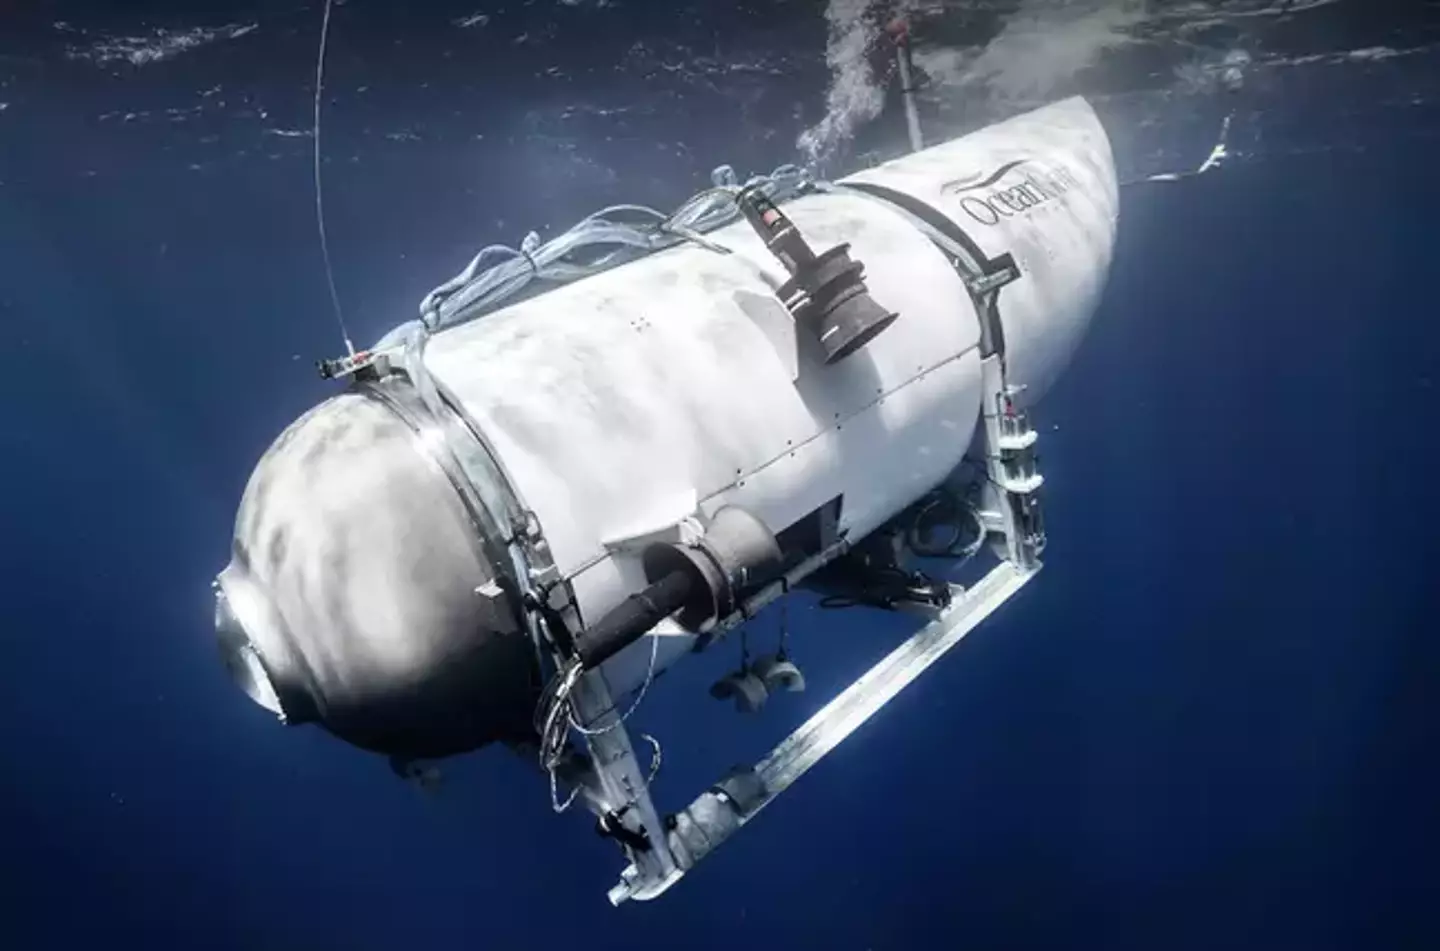 The production company expressed concerns over the safety of the Titan submersible.